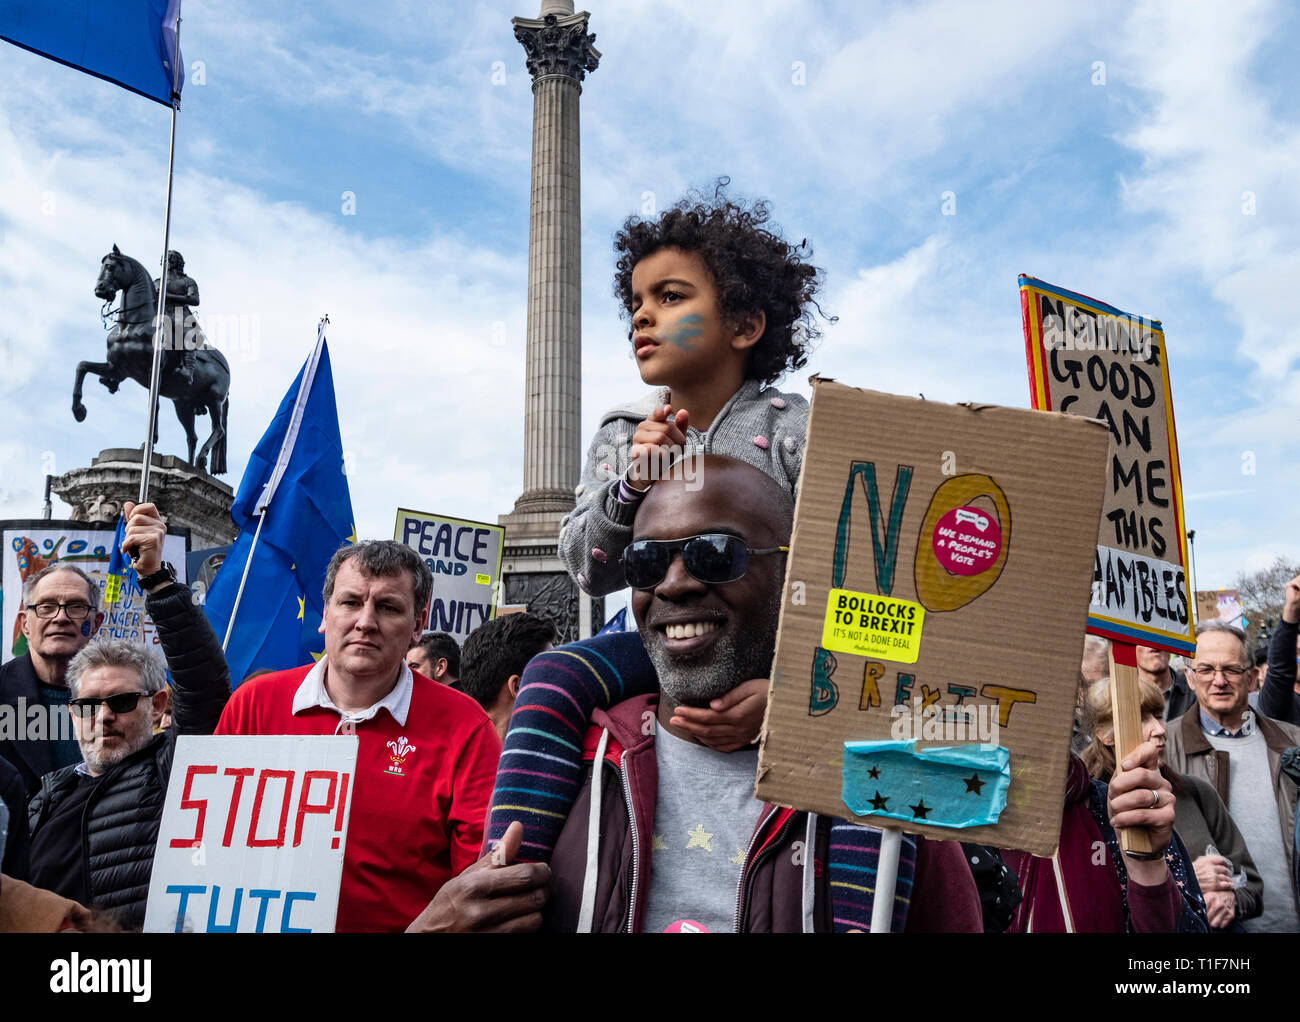 One million people marched through London on Peoples Vote anti-Brexit  protest 23 March 2019 Stock Photo